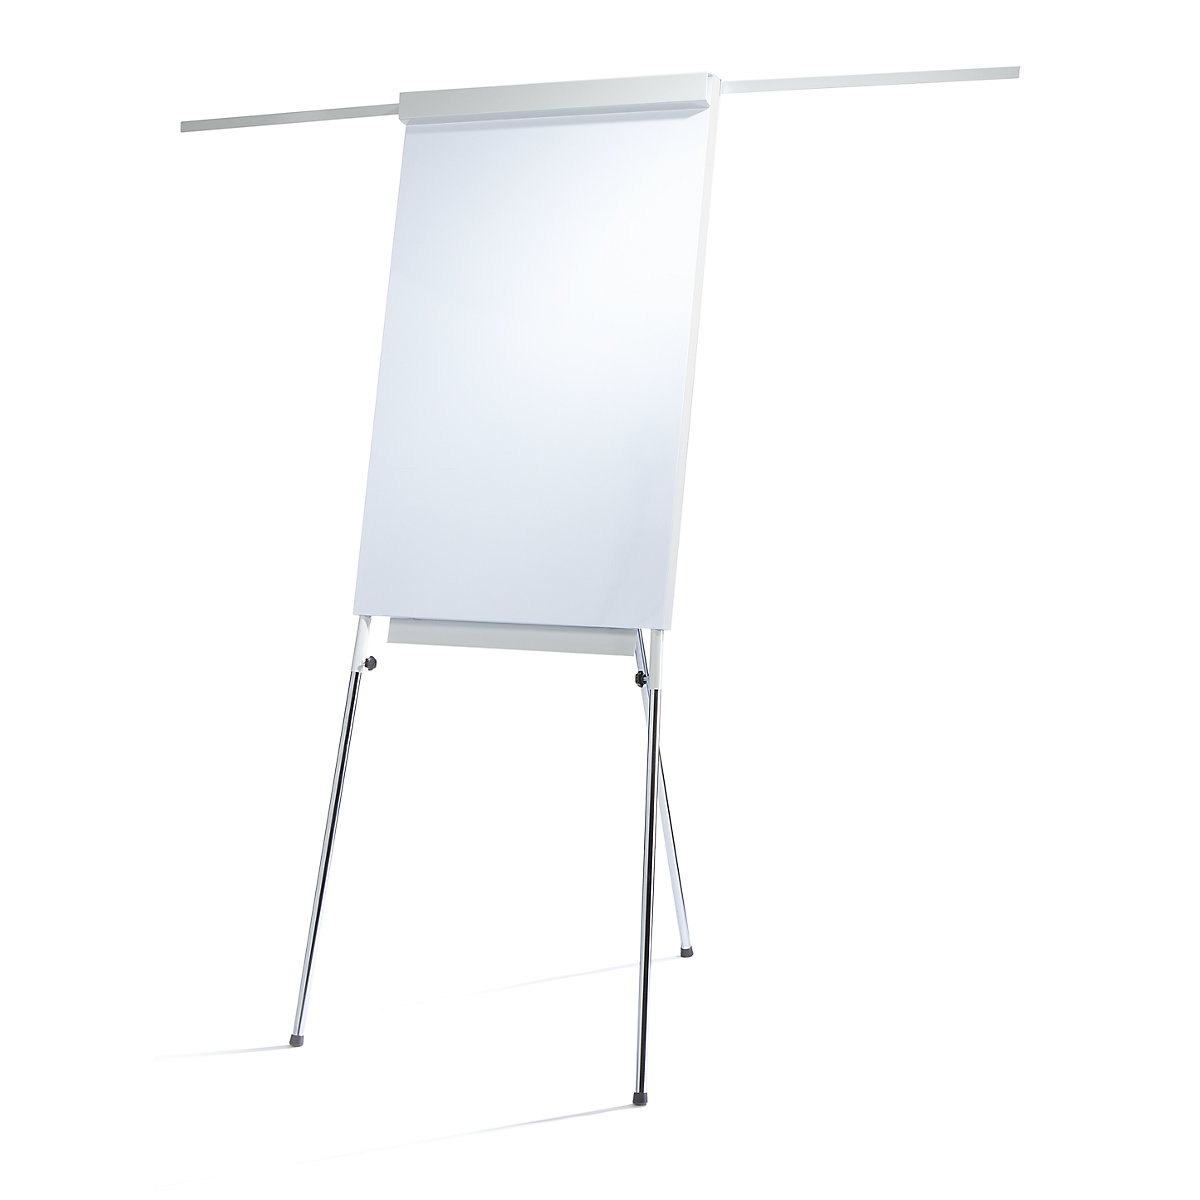 Flip chart: stand model with side arms